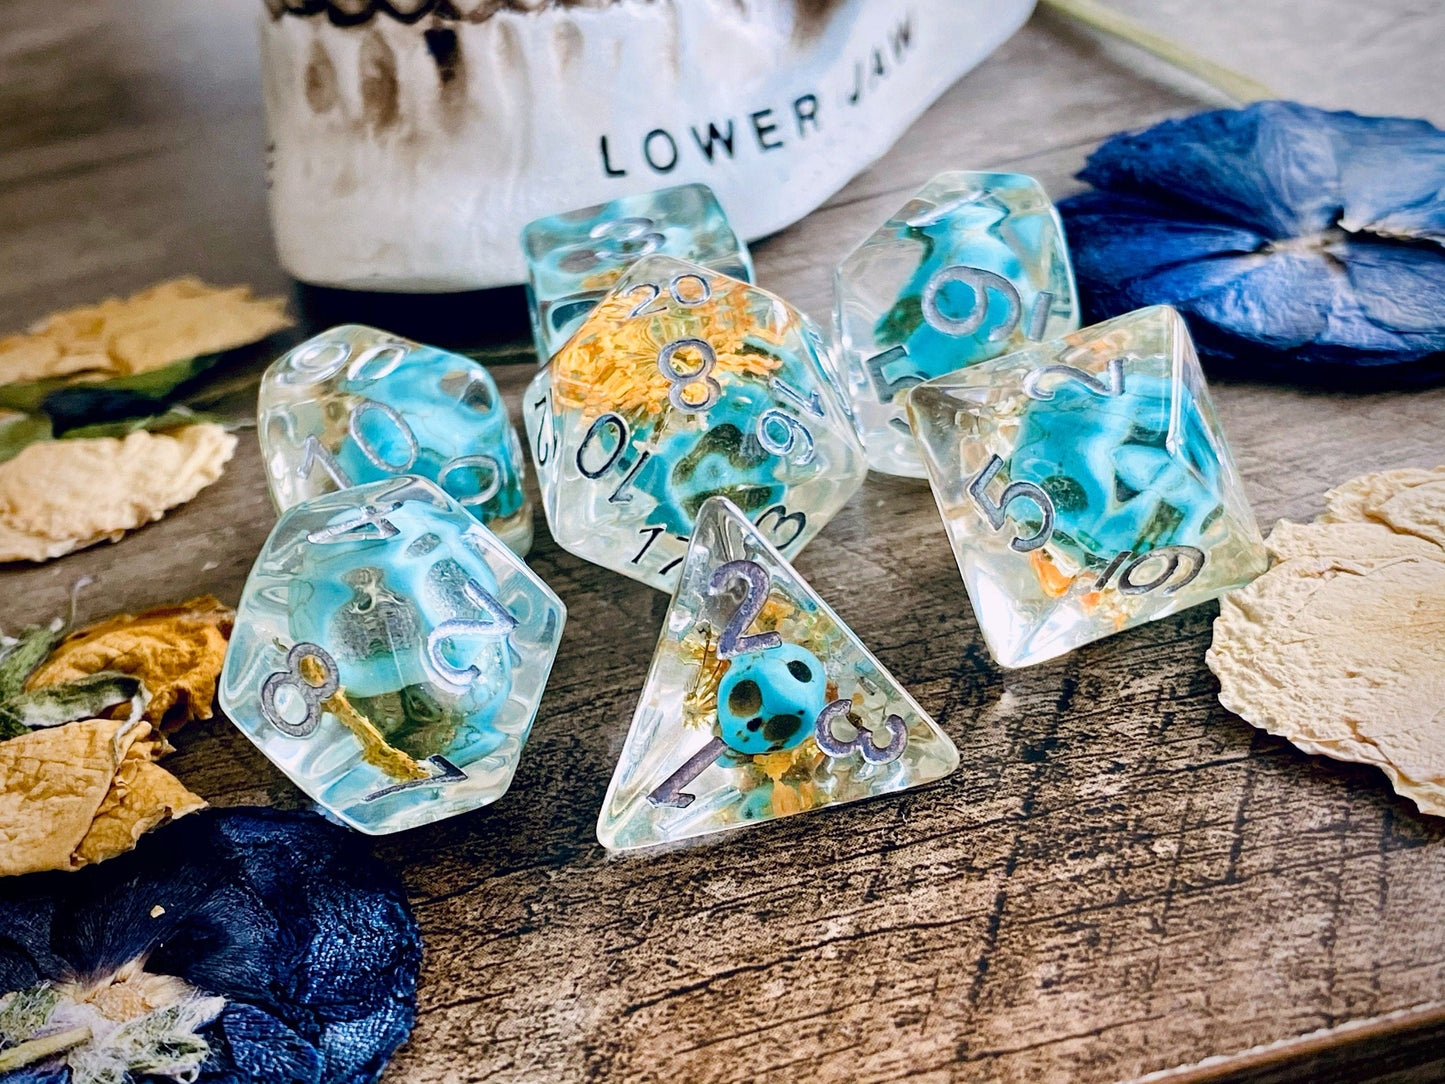 The Crooked Tavern Dice Sets Aztec Skull RPG Dice Set | Skulls and Real Flowers inside!